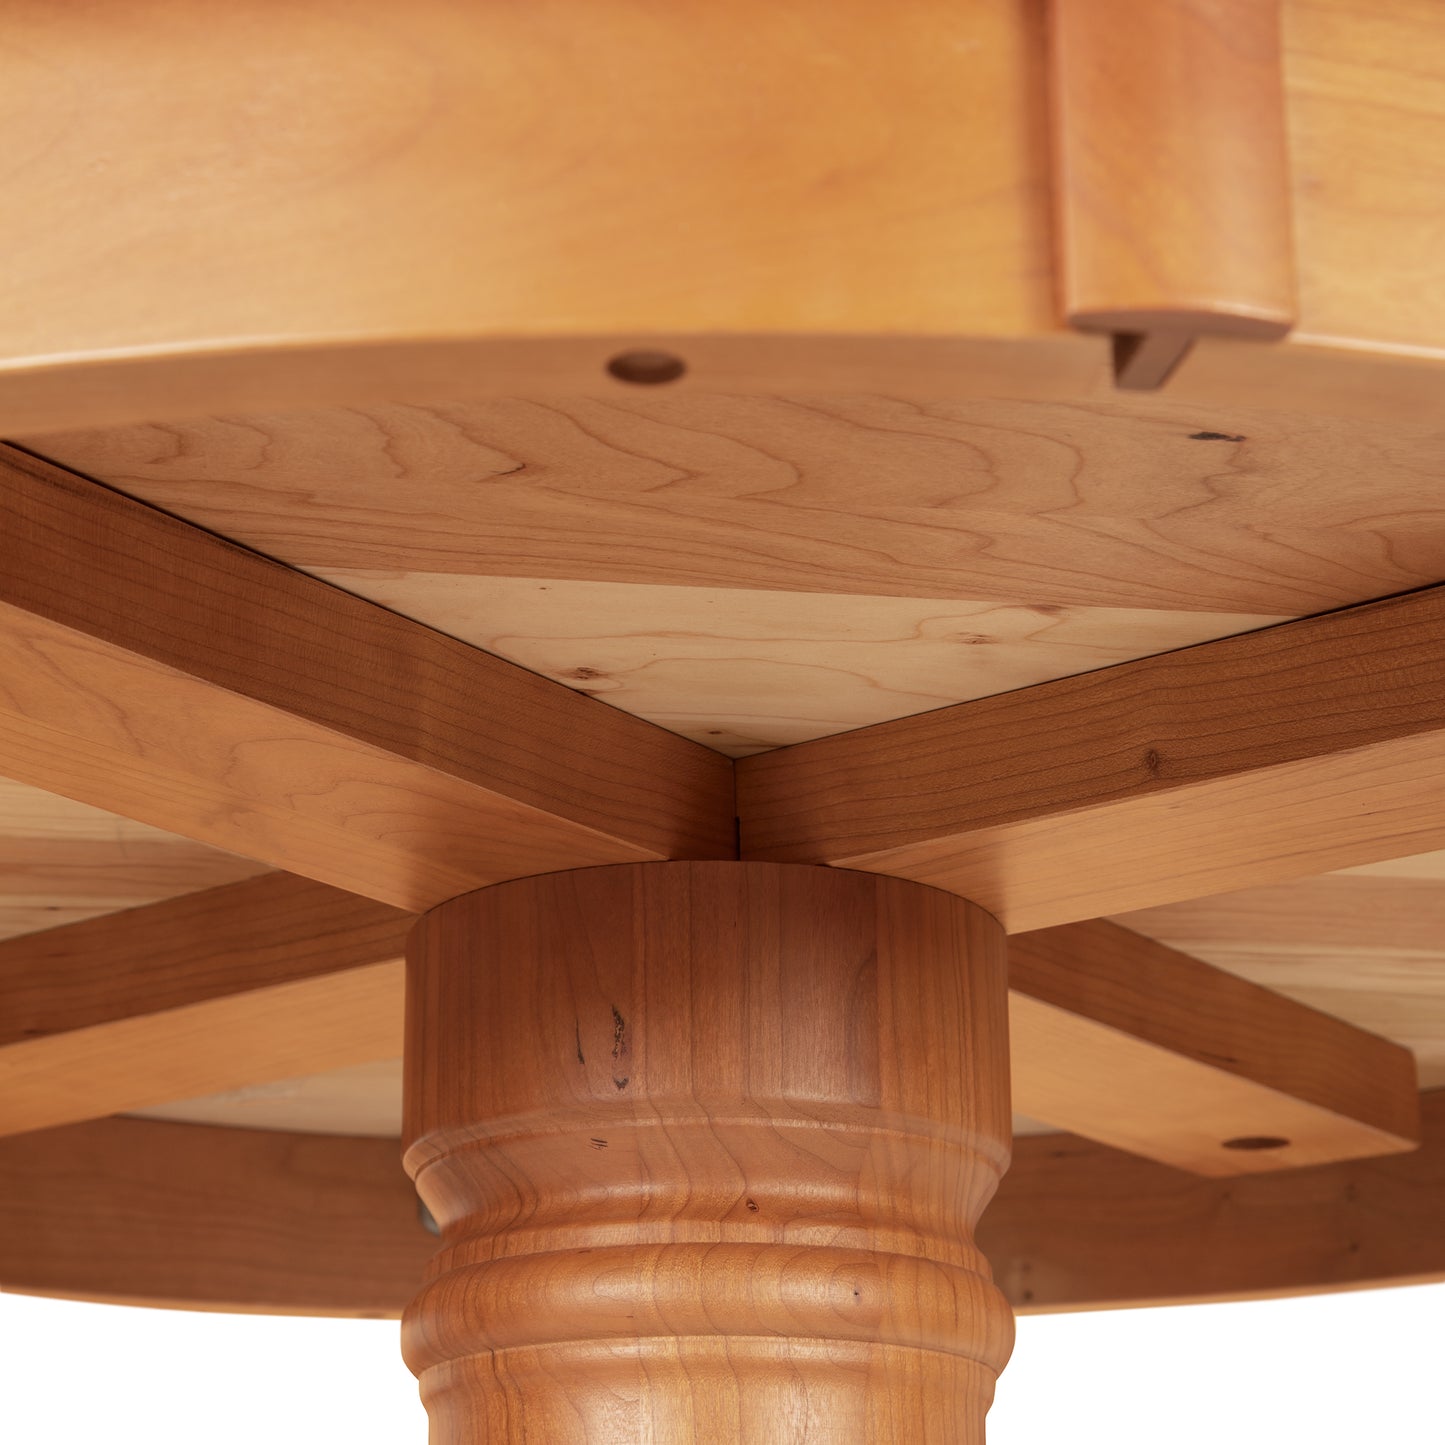 The top of the Duncan-Phyfe Round Pedestal Dining Table from Lyndon Furniture is made of wood.